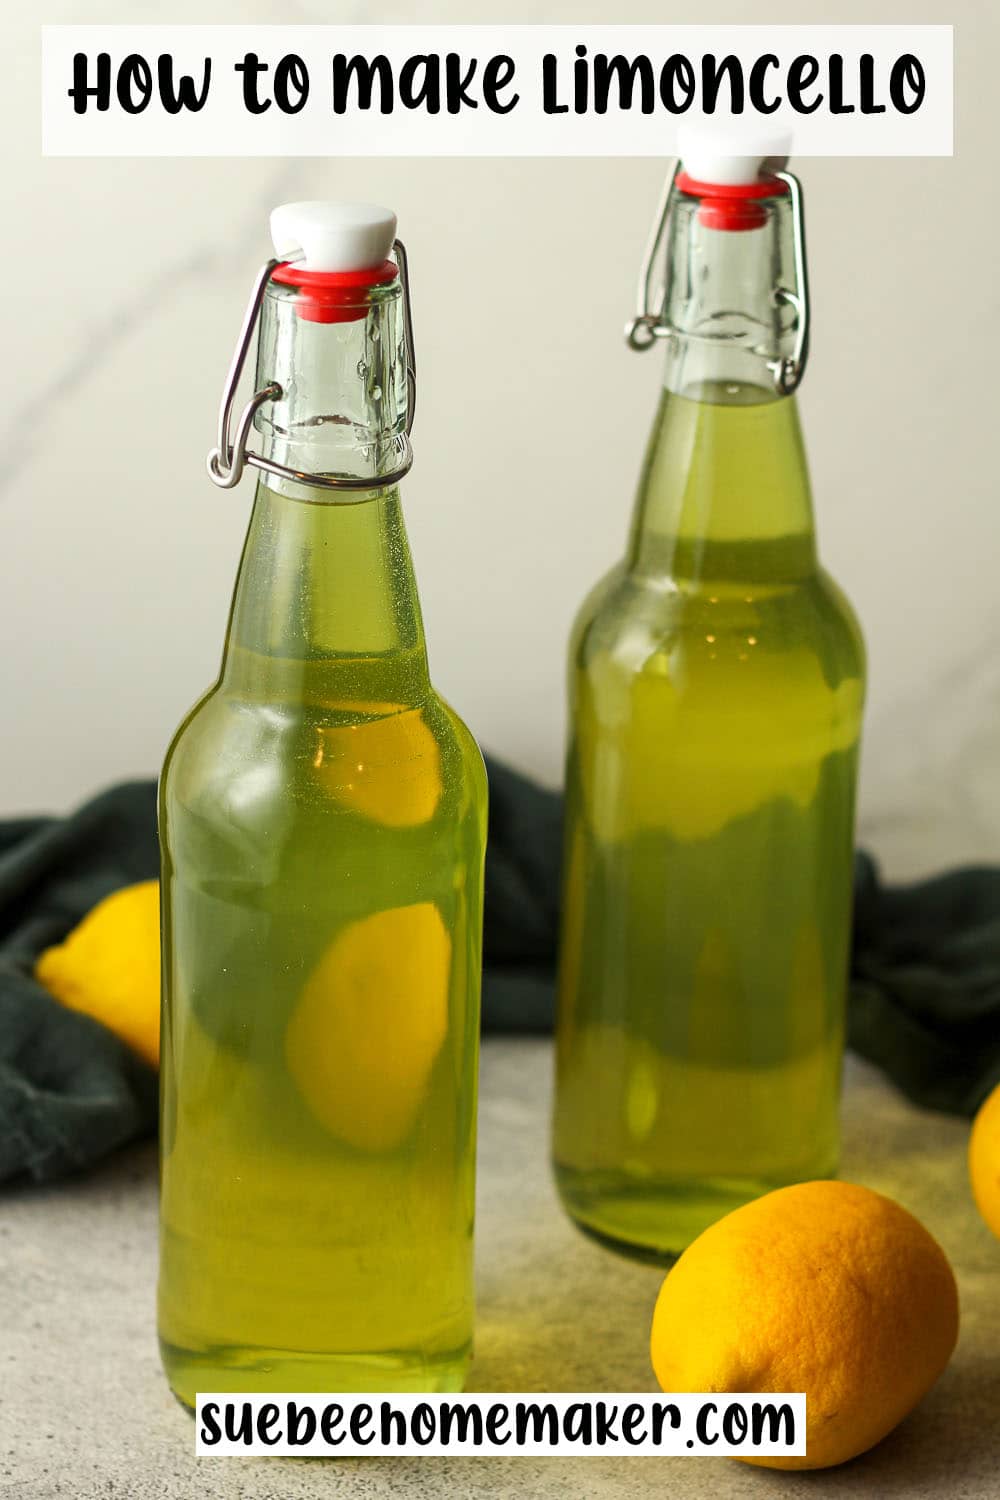 Two bottle of limoncello.